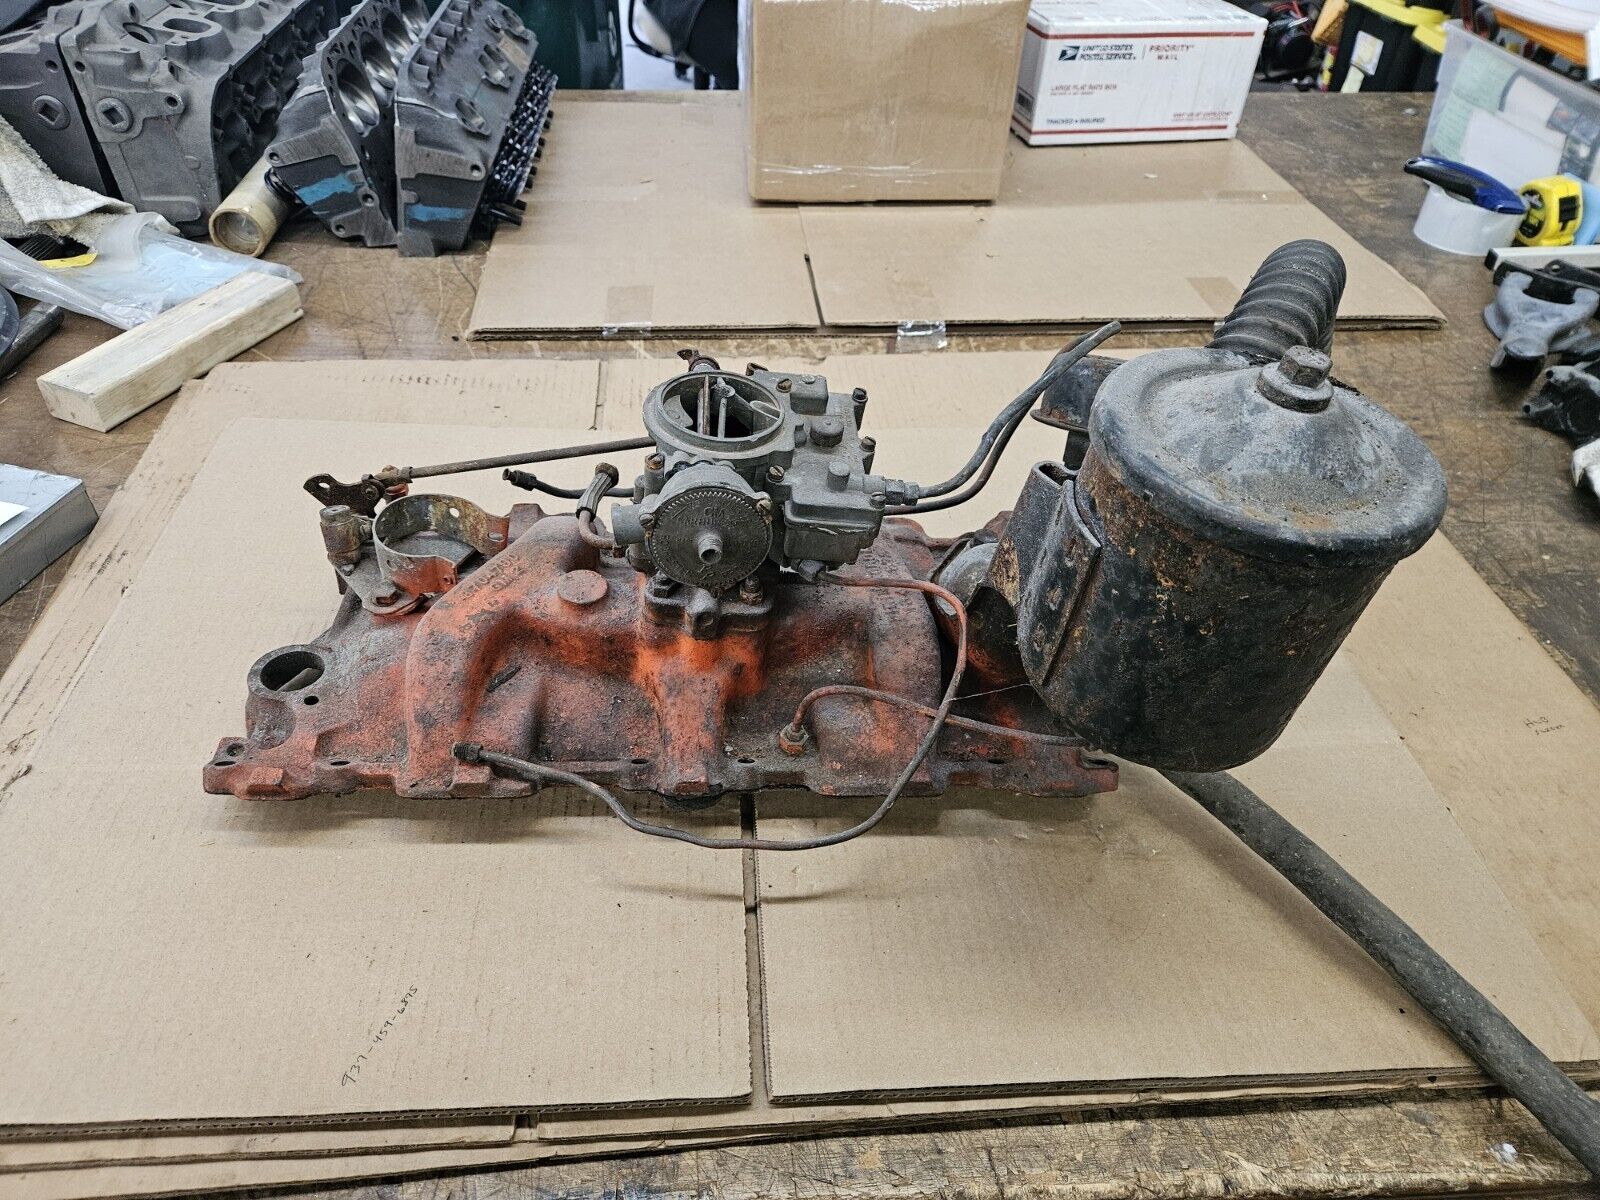 1955 Chevy Bel Air 265 2bbl Intake #3704790, Oil Canister, Carburetor, Linkage. 